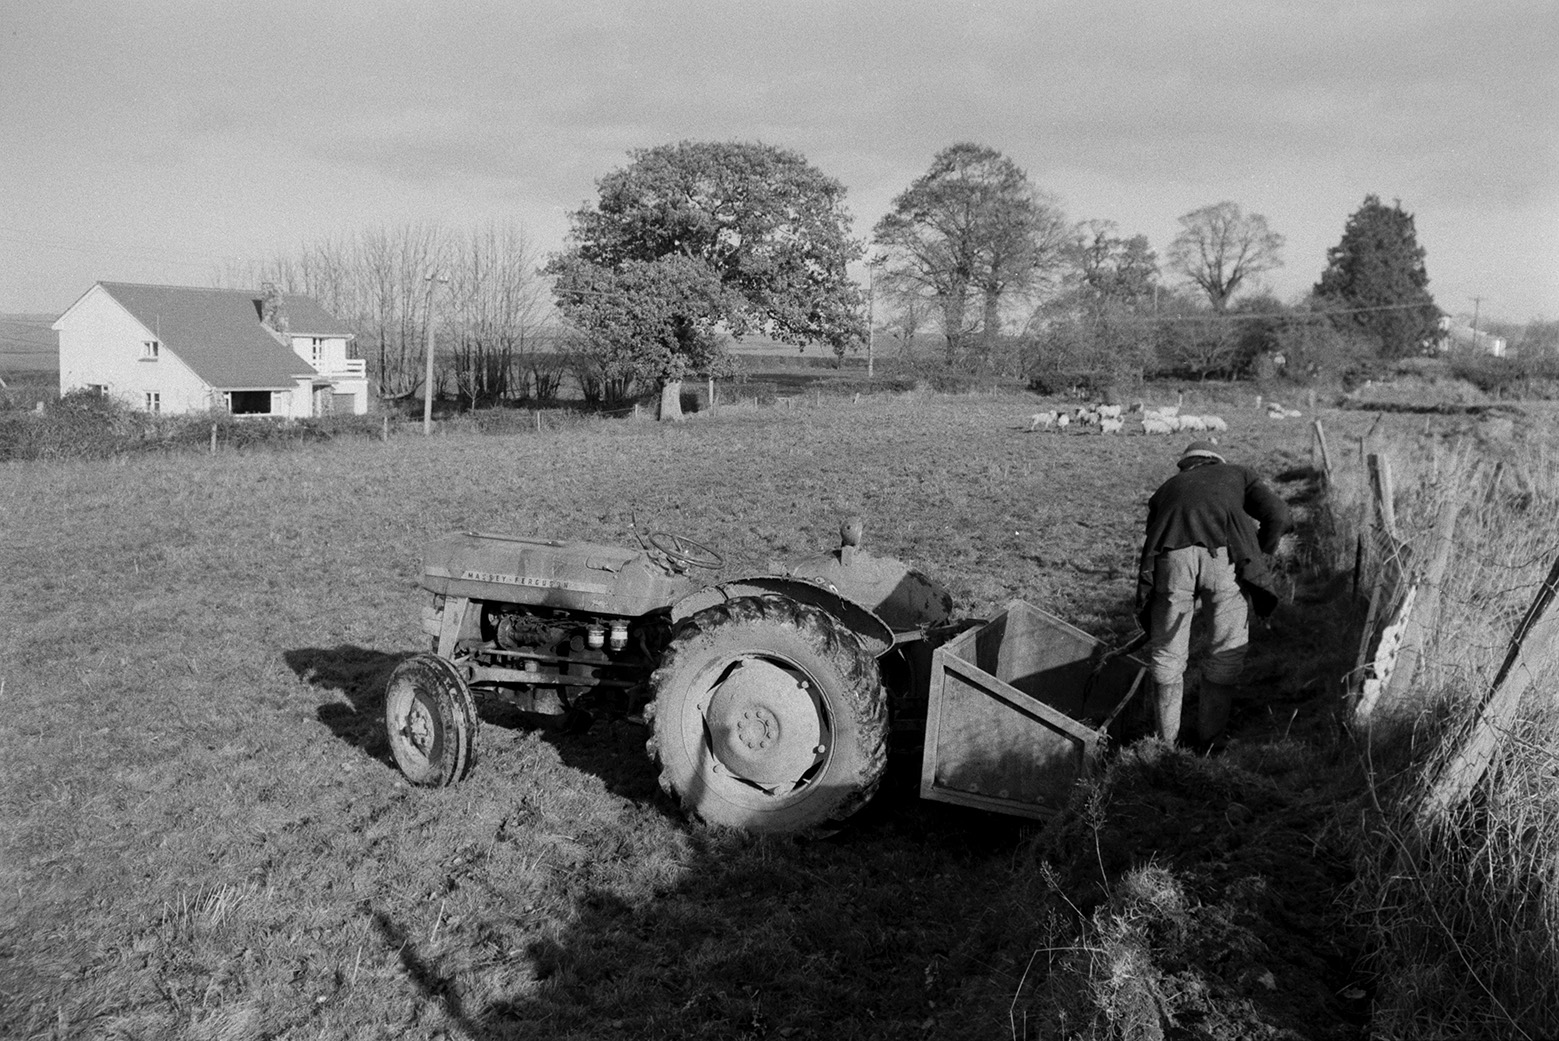 Derek Bright cutting turf, or clats, to mend a hedge broken by sheep, in a field at Mill Road Farm, Beaford. He is loading the turf into a link box. Sheep grazing and a house can be seen in the background. The farm was also known as Jeffrys.